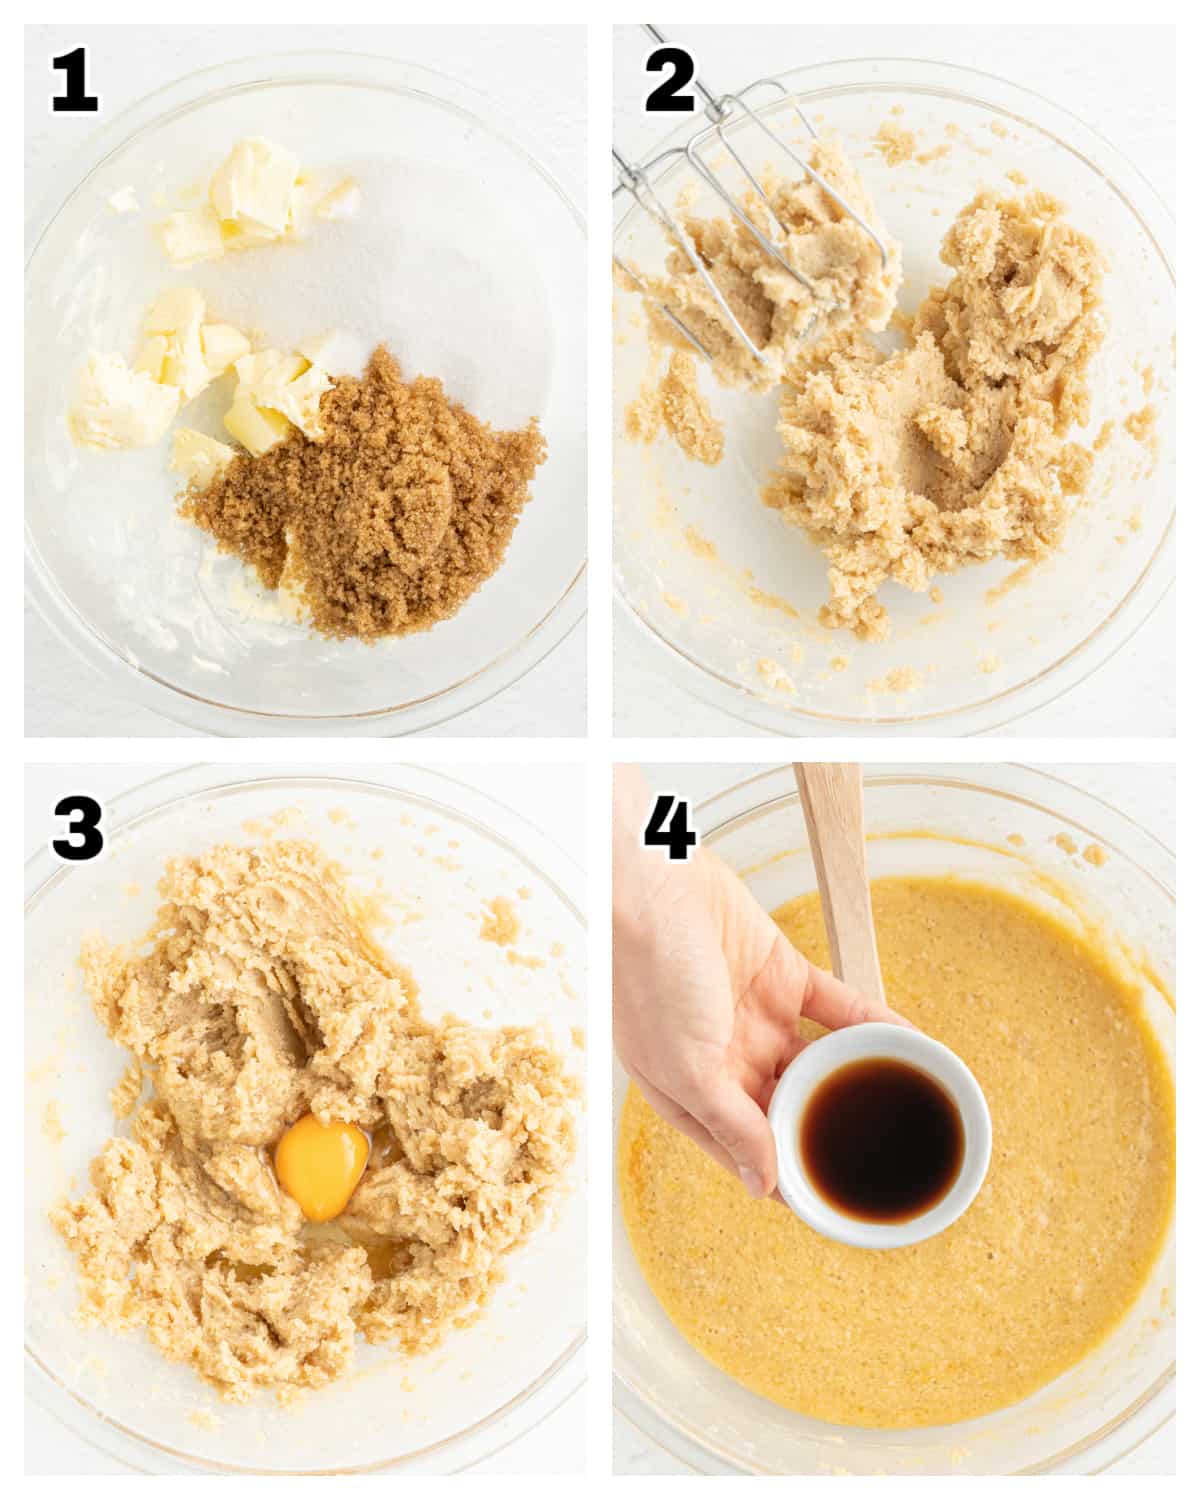 ingredients in bowls, steps to make apple coffee cake